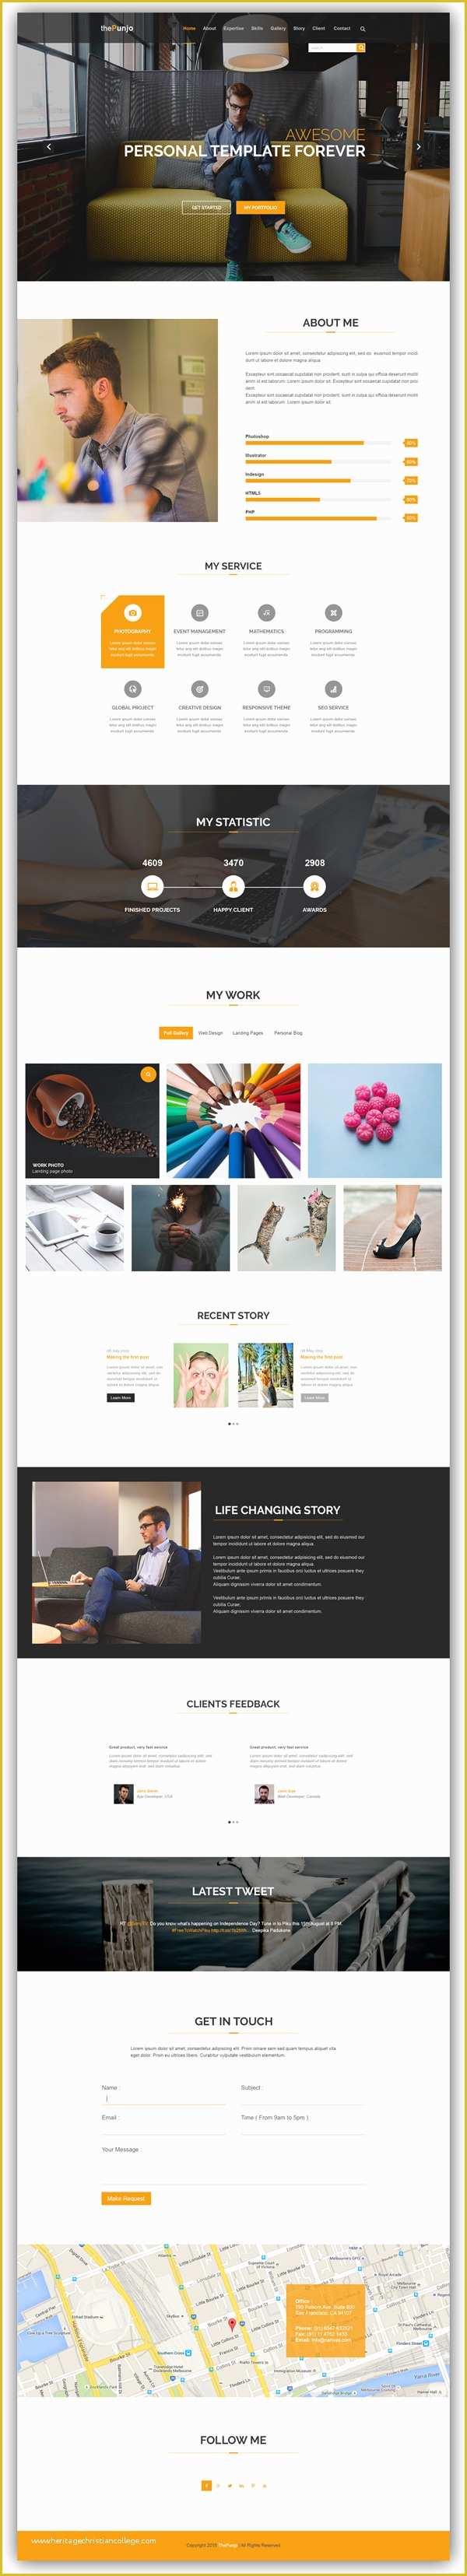 Personal Portfolio Template Free Download Of Shop Psd Files for Designers 12 Awesome Free Psd